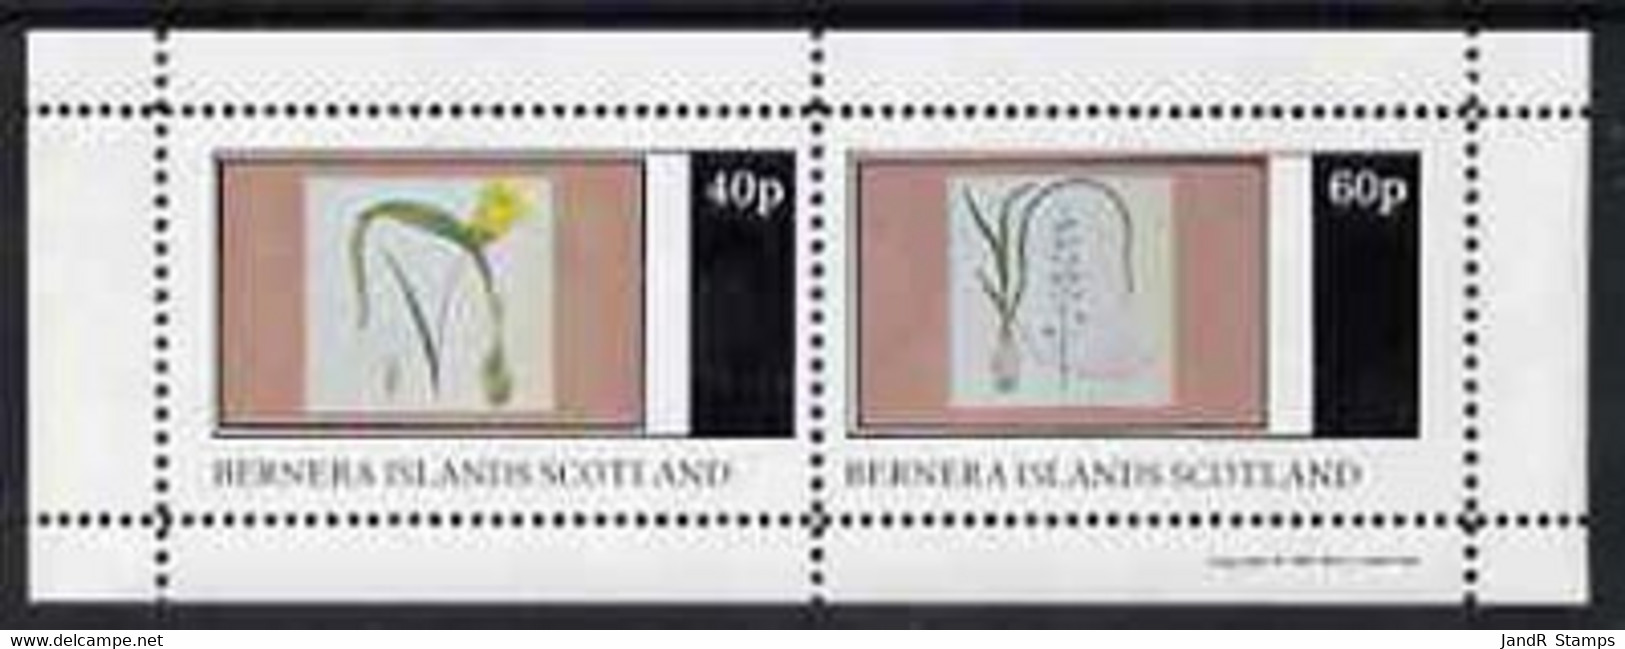 Bernera 1981 Flowers #04 Perf  Set Of 2 Values (40p & 60p) MNH - Local Issues